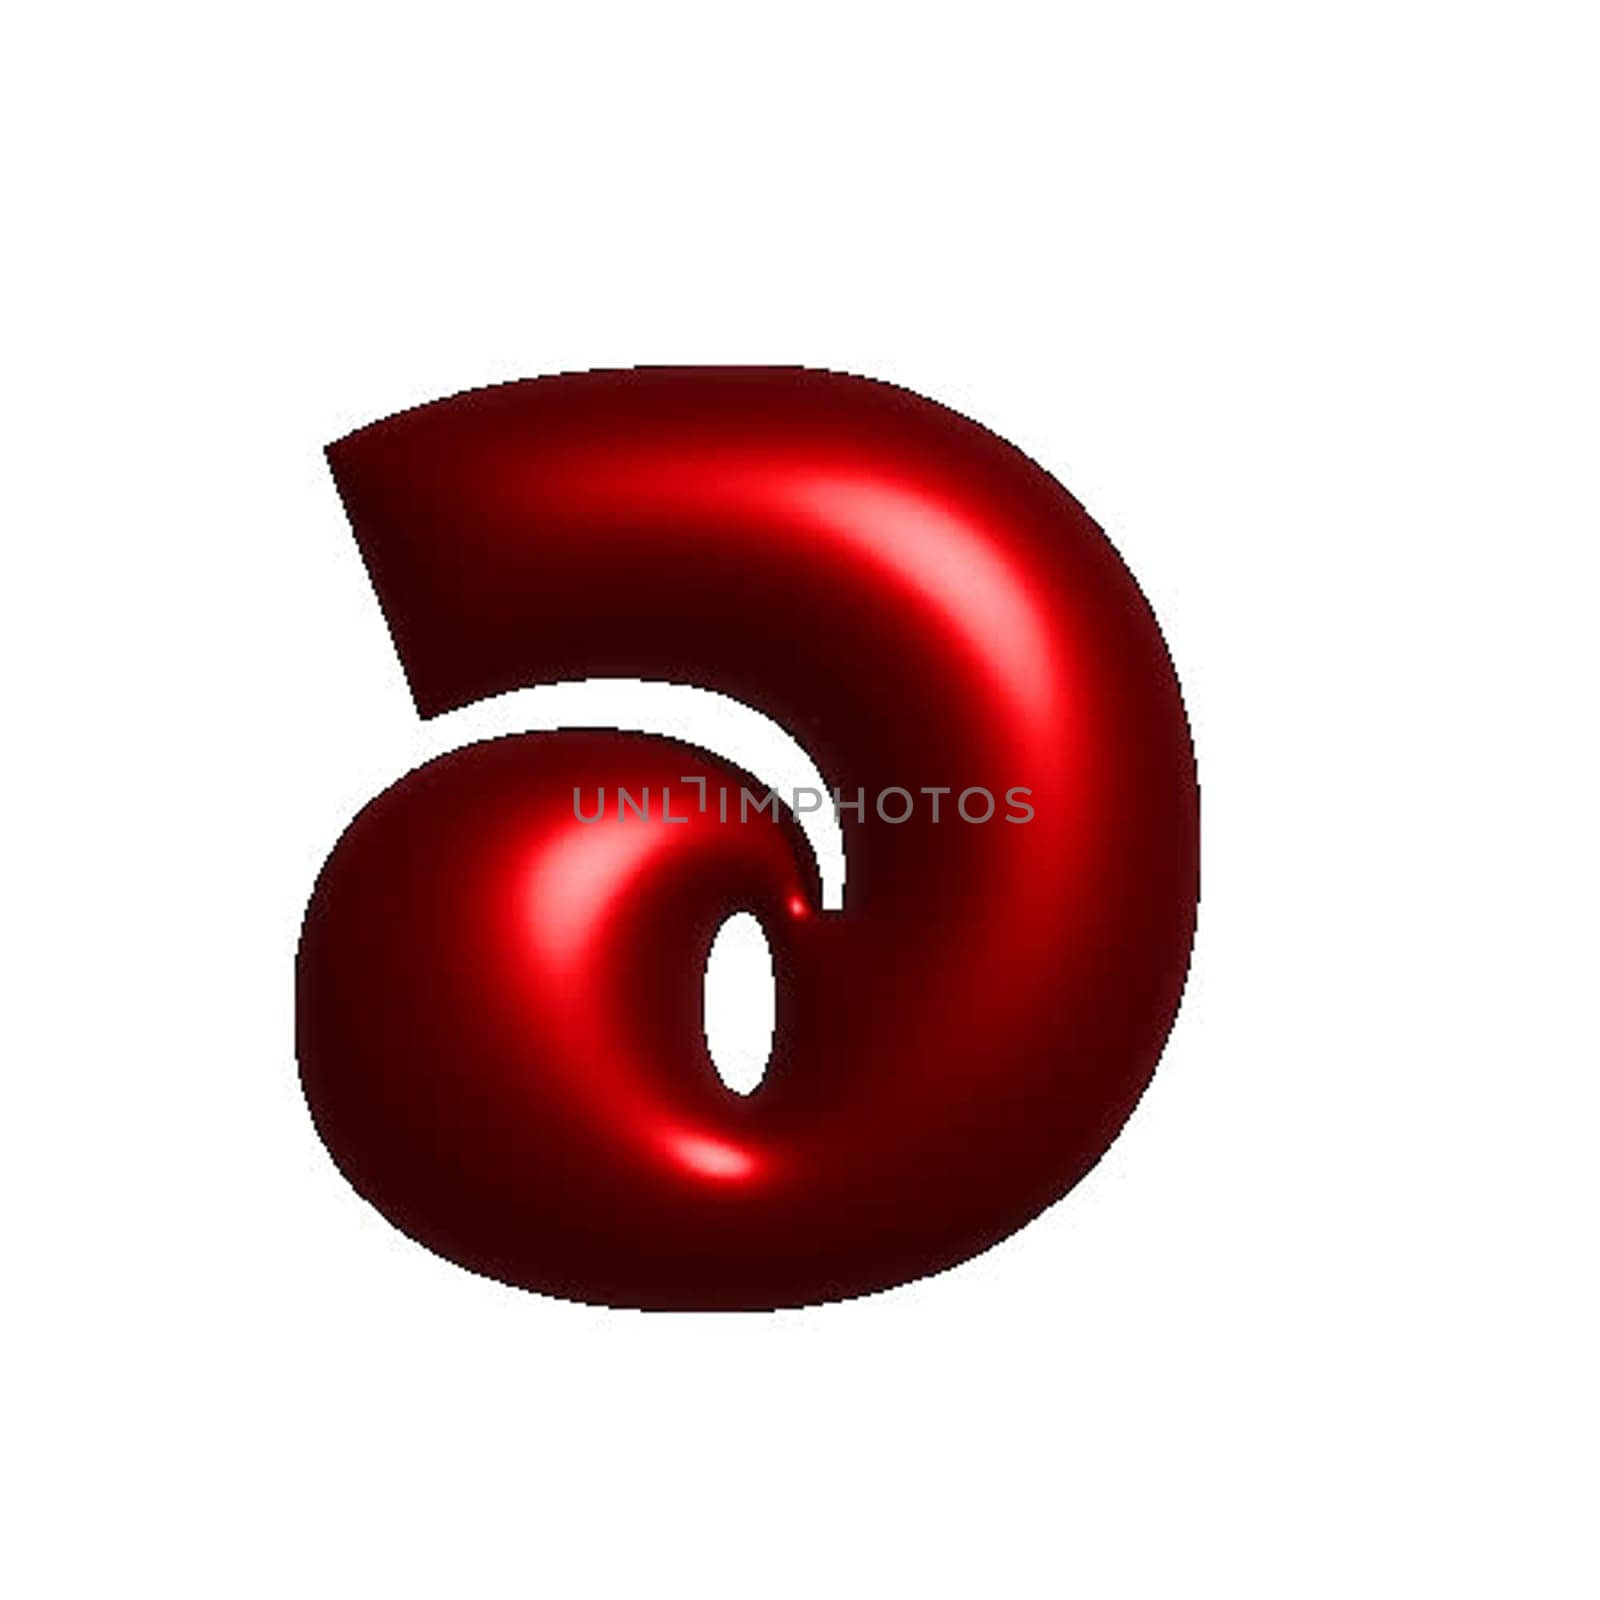 Red metal shiny reflective letter D 3D illustration by Dustick